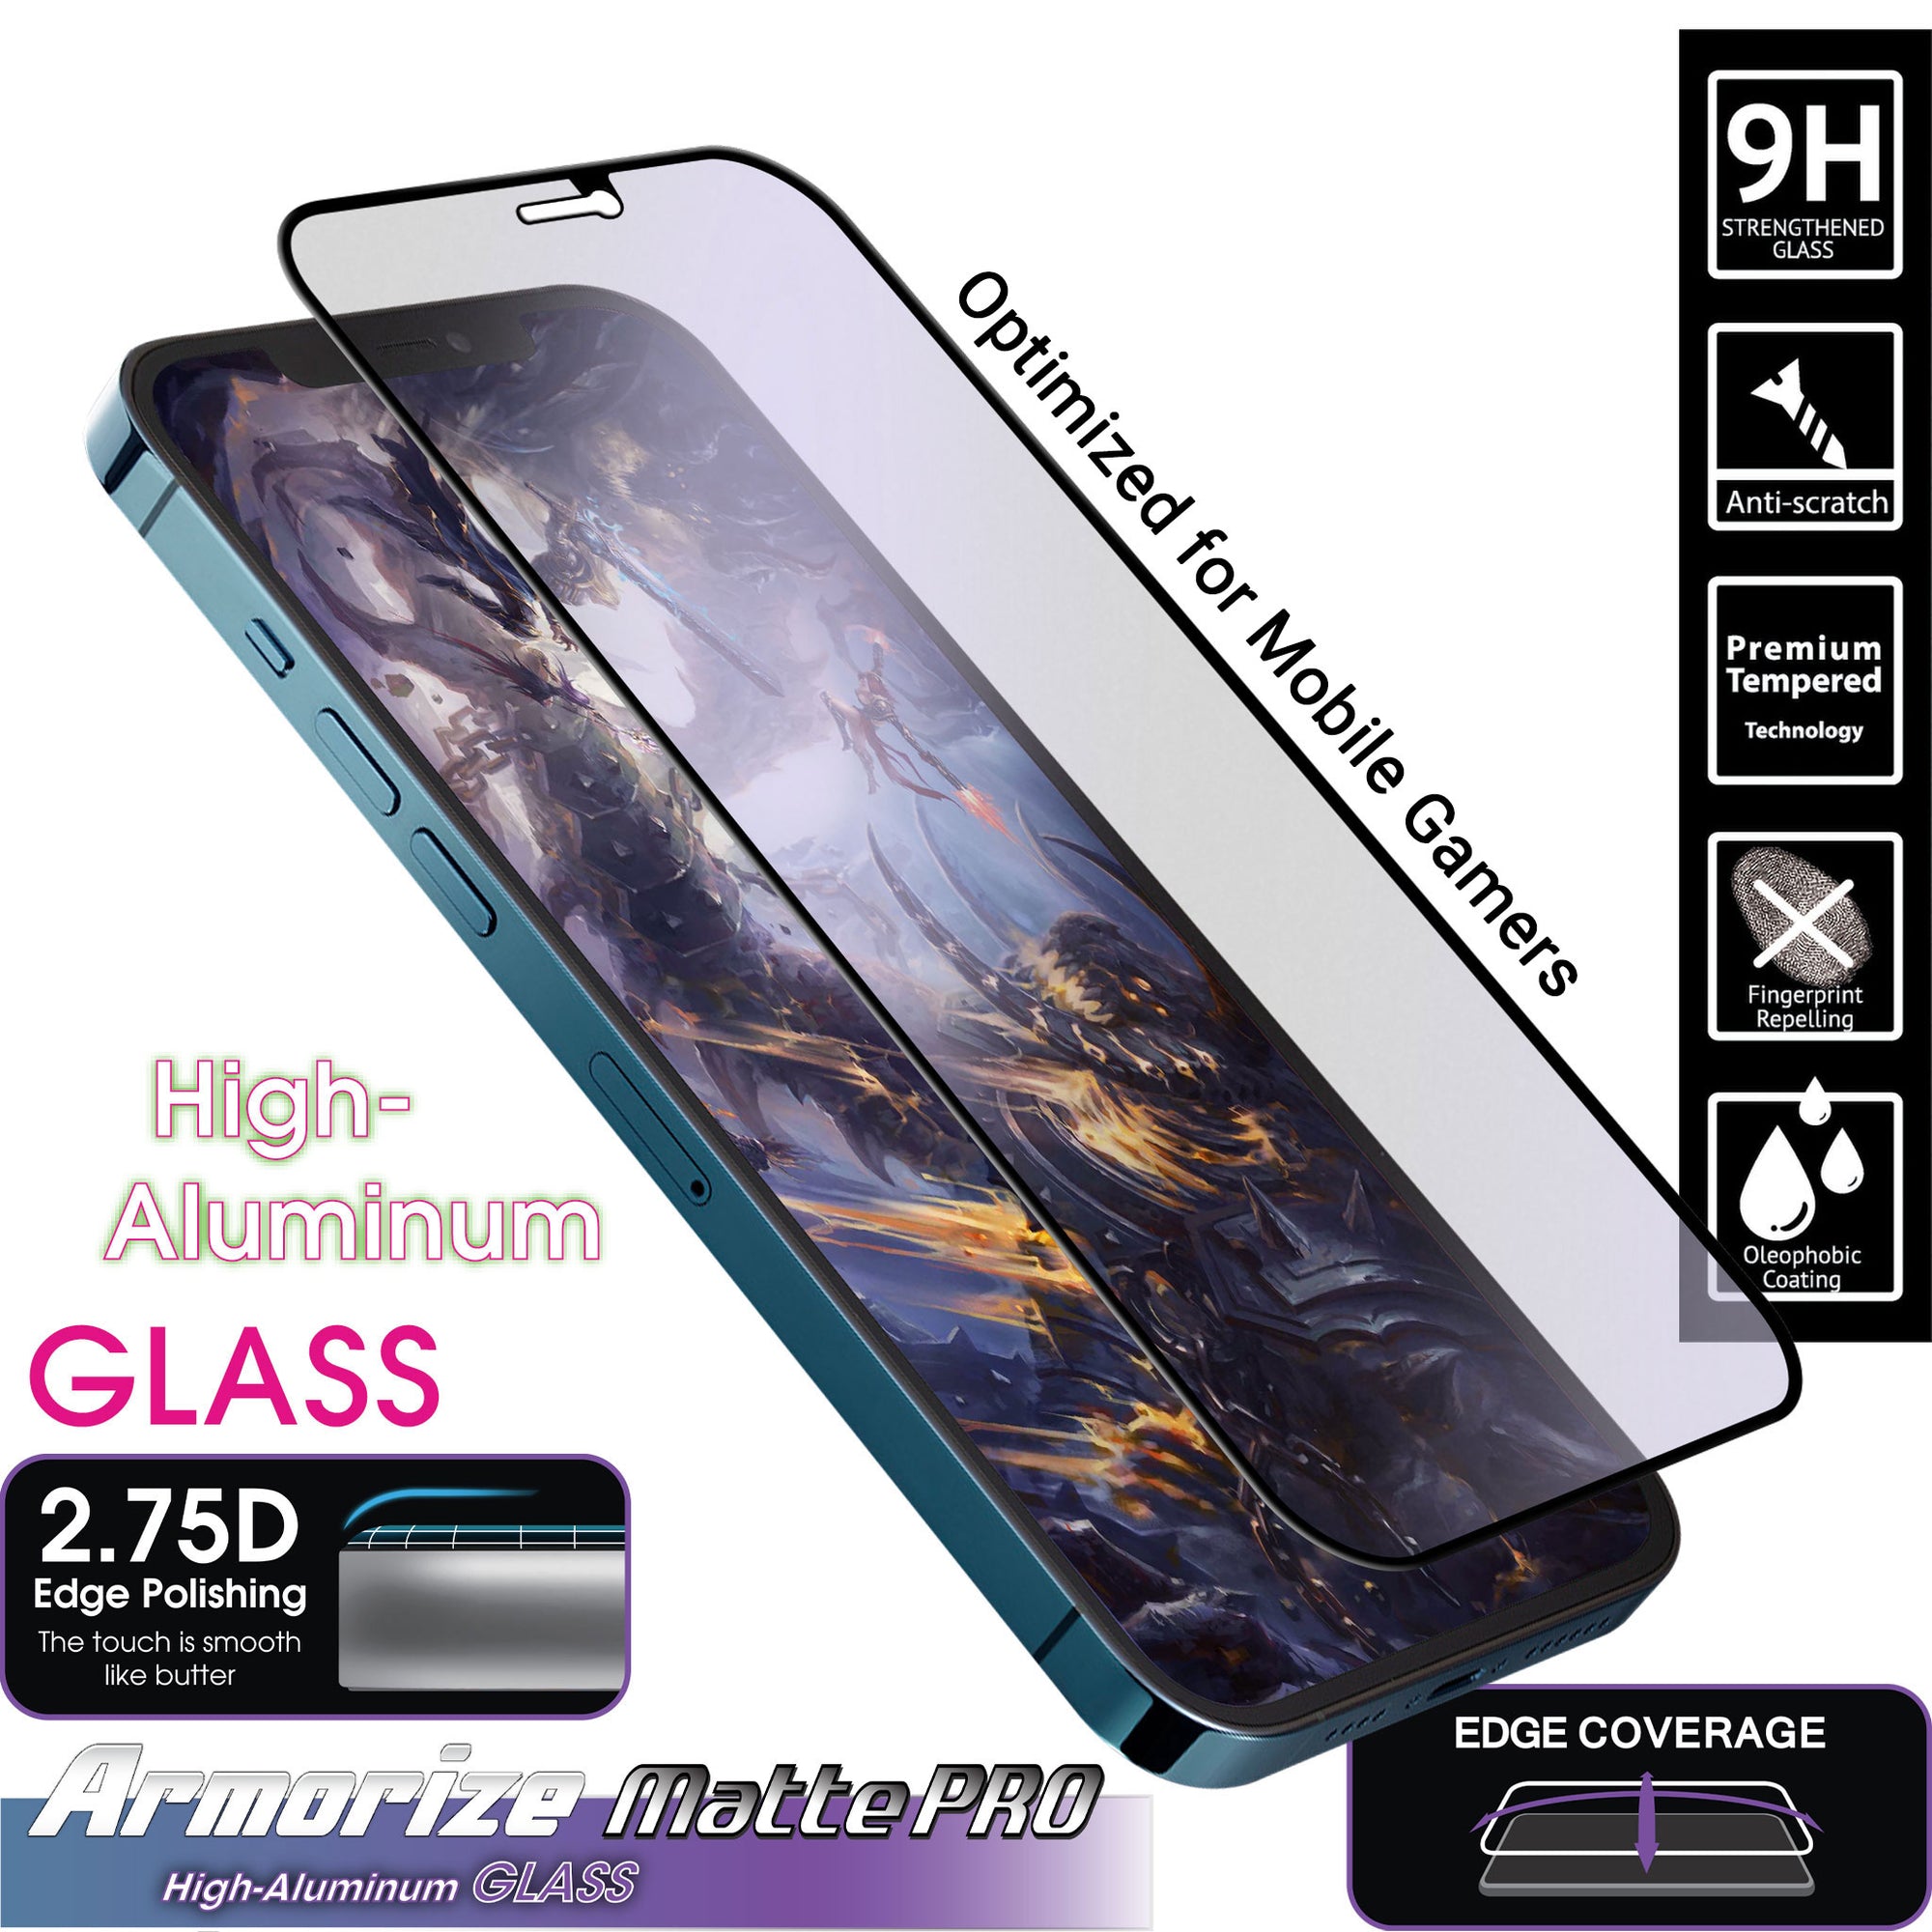 iPhone 12 Pro Max Armorize Matte Pro Gaming Screen Protector FFG-275